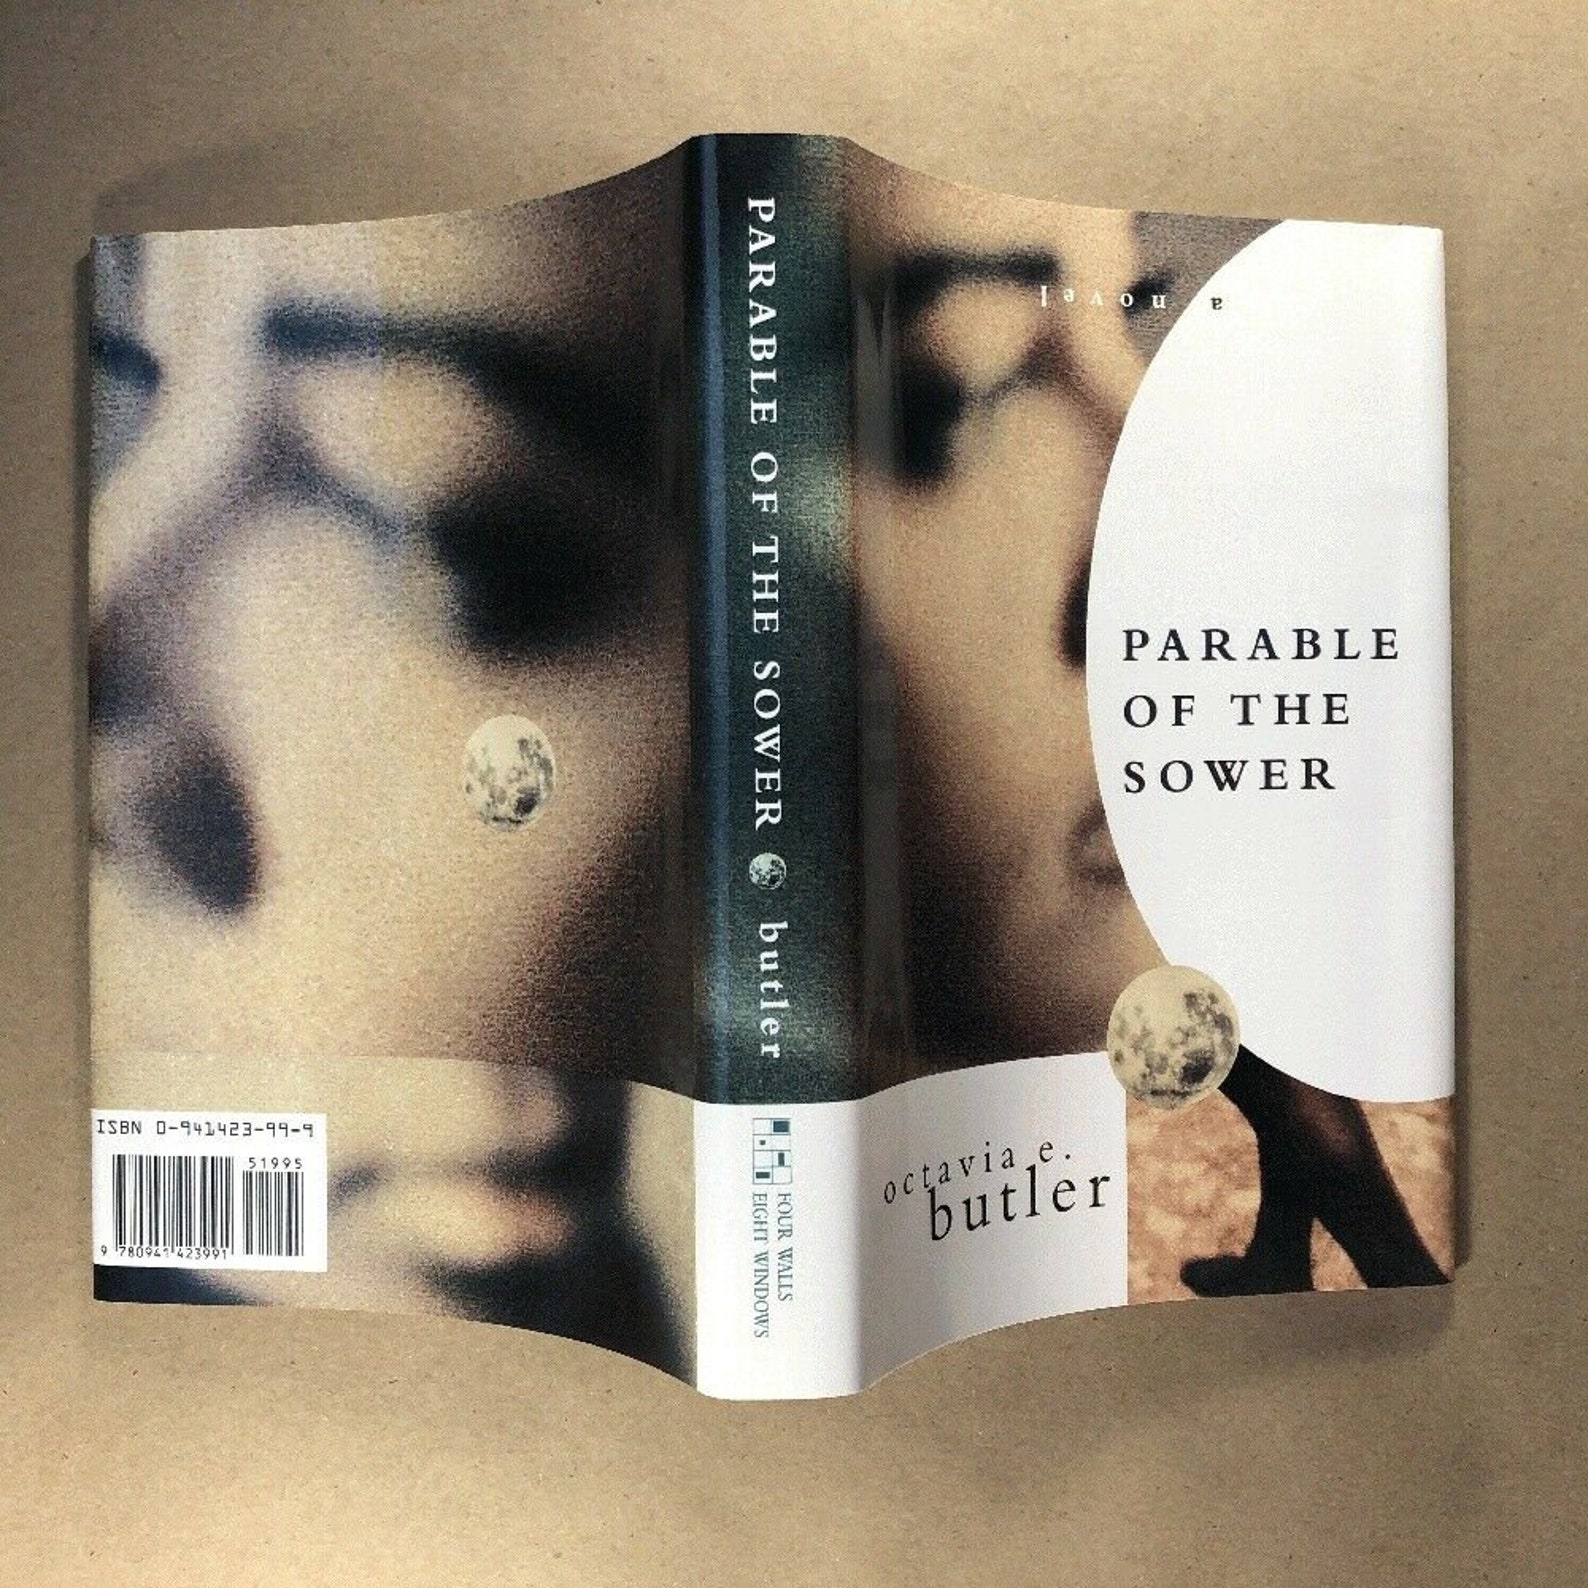 Parable of the Sower by Octavia E. Butler First Edition | Etsy